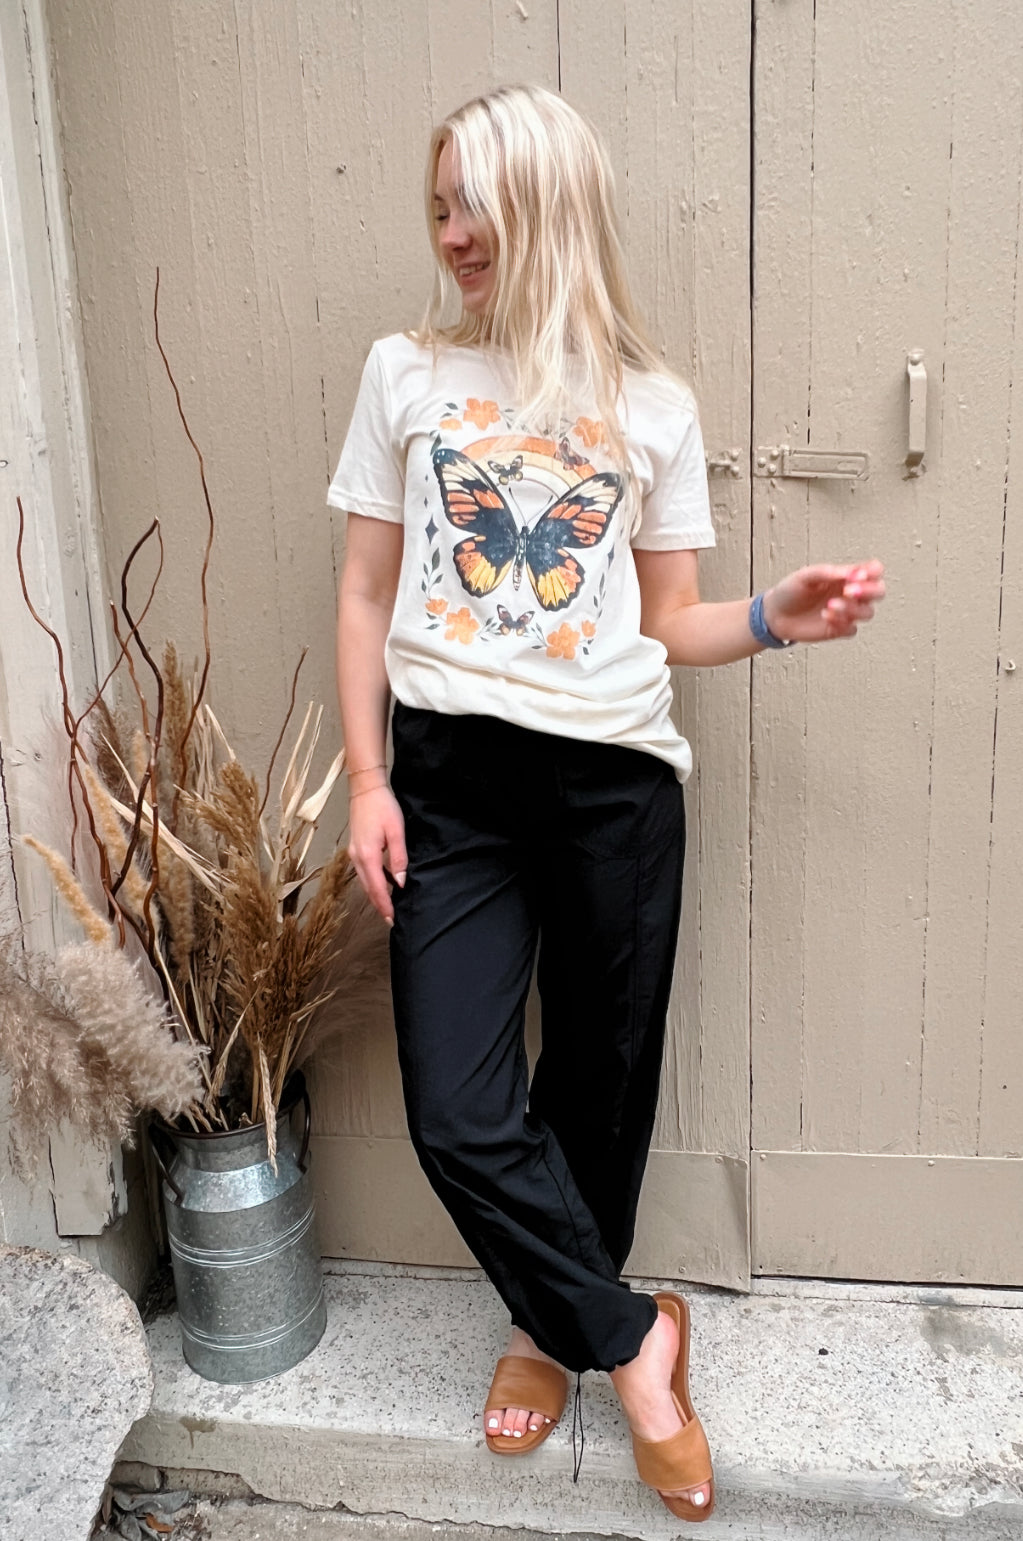 The Rainbows and Butterflies Graphic Tee